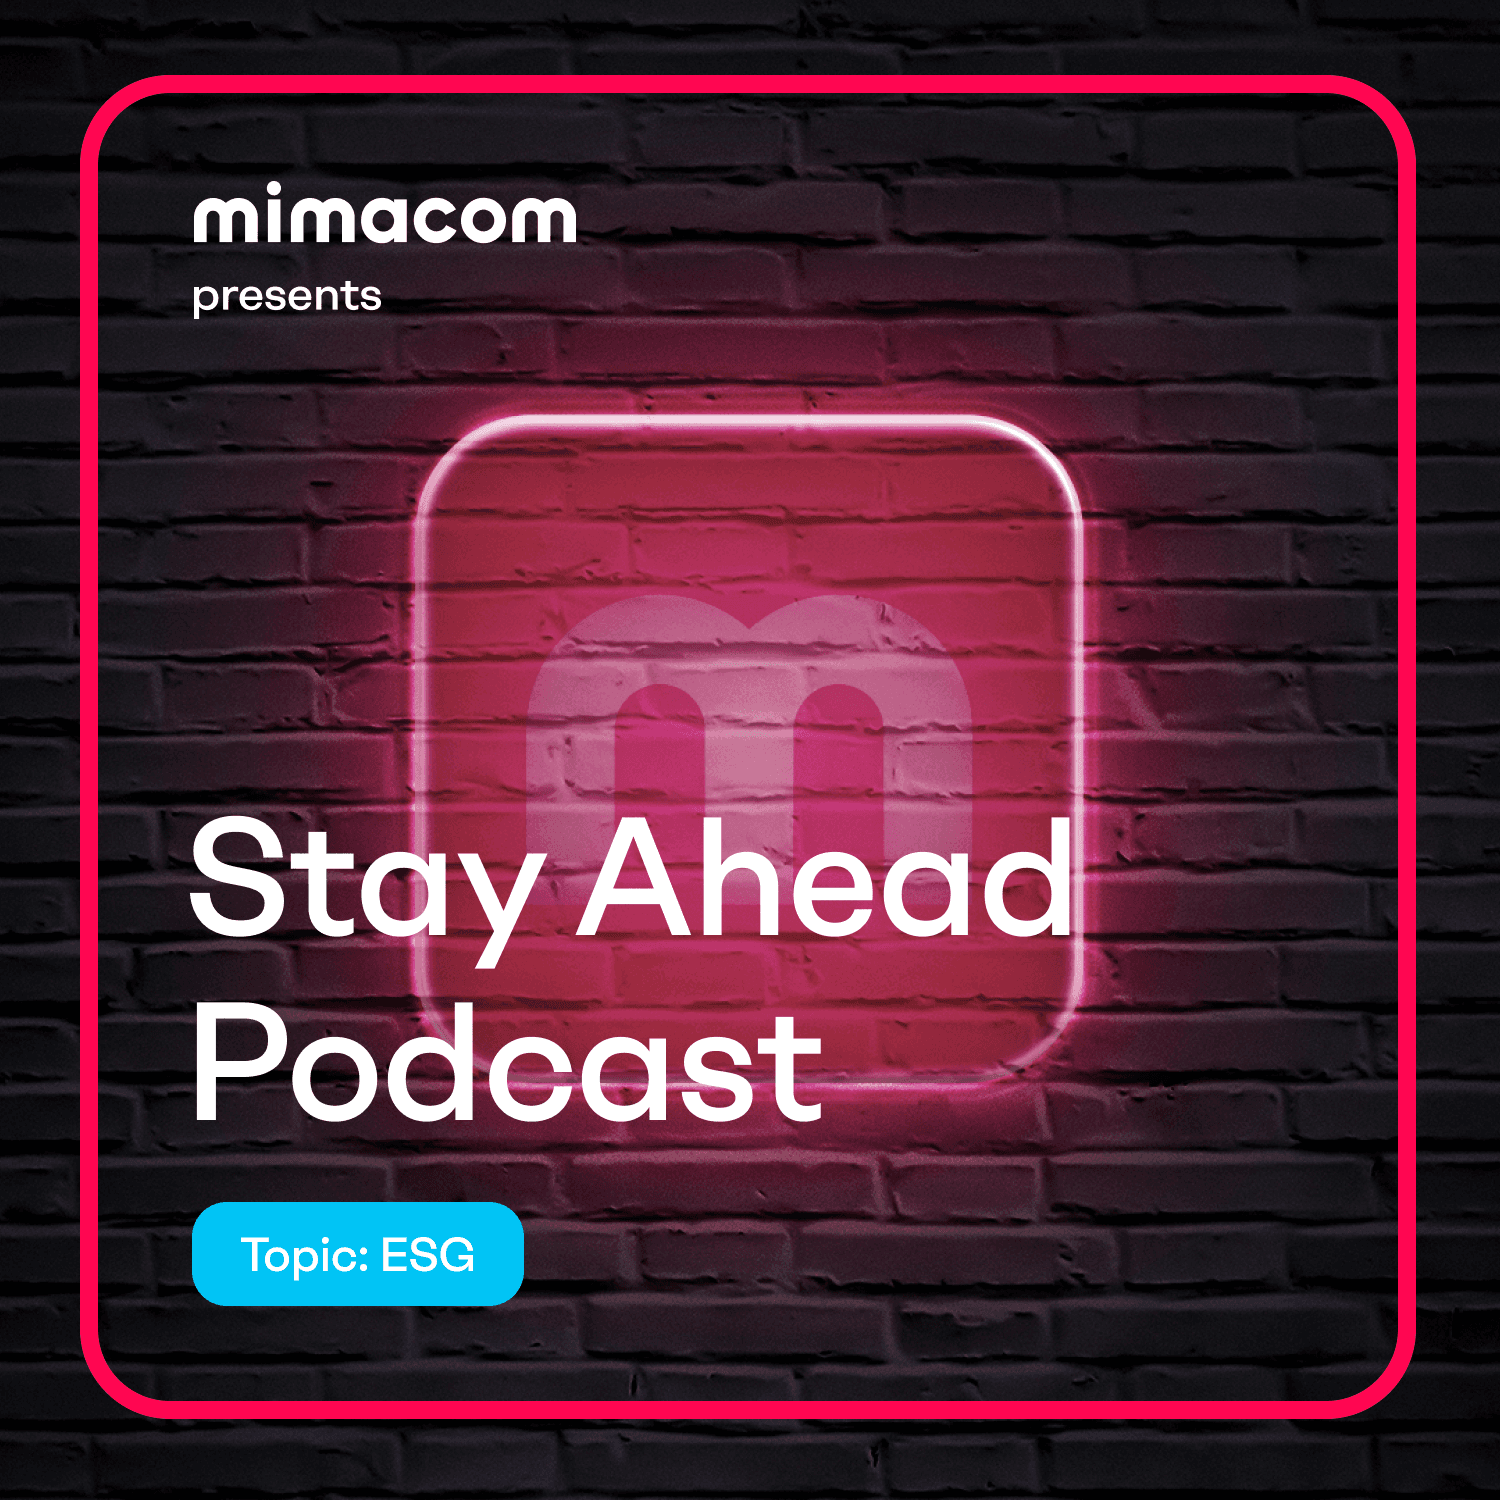 Mimacom-Stay-Ahead-Podcast-ESG-Episode.png